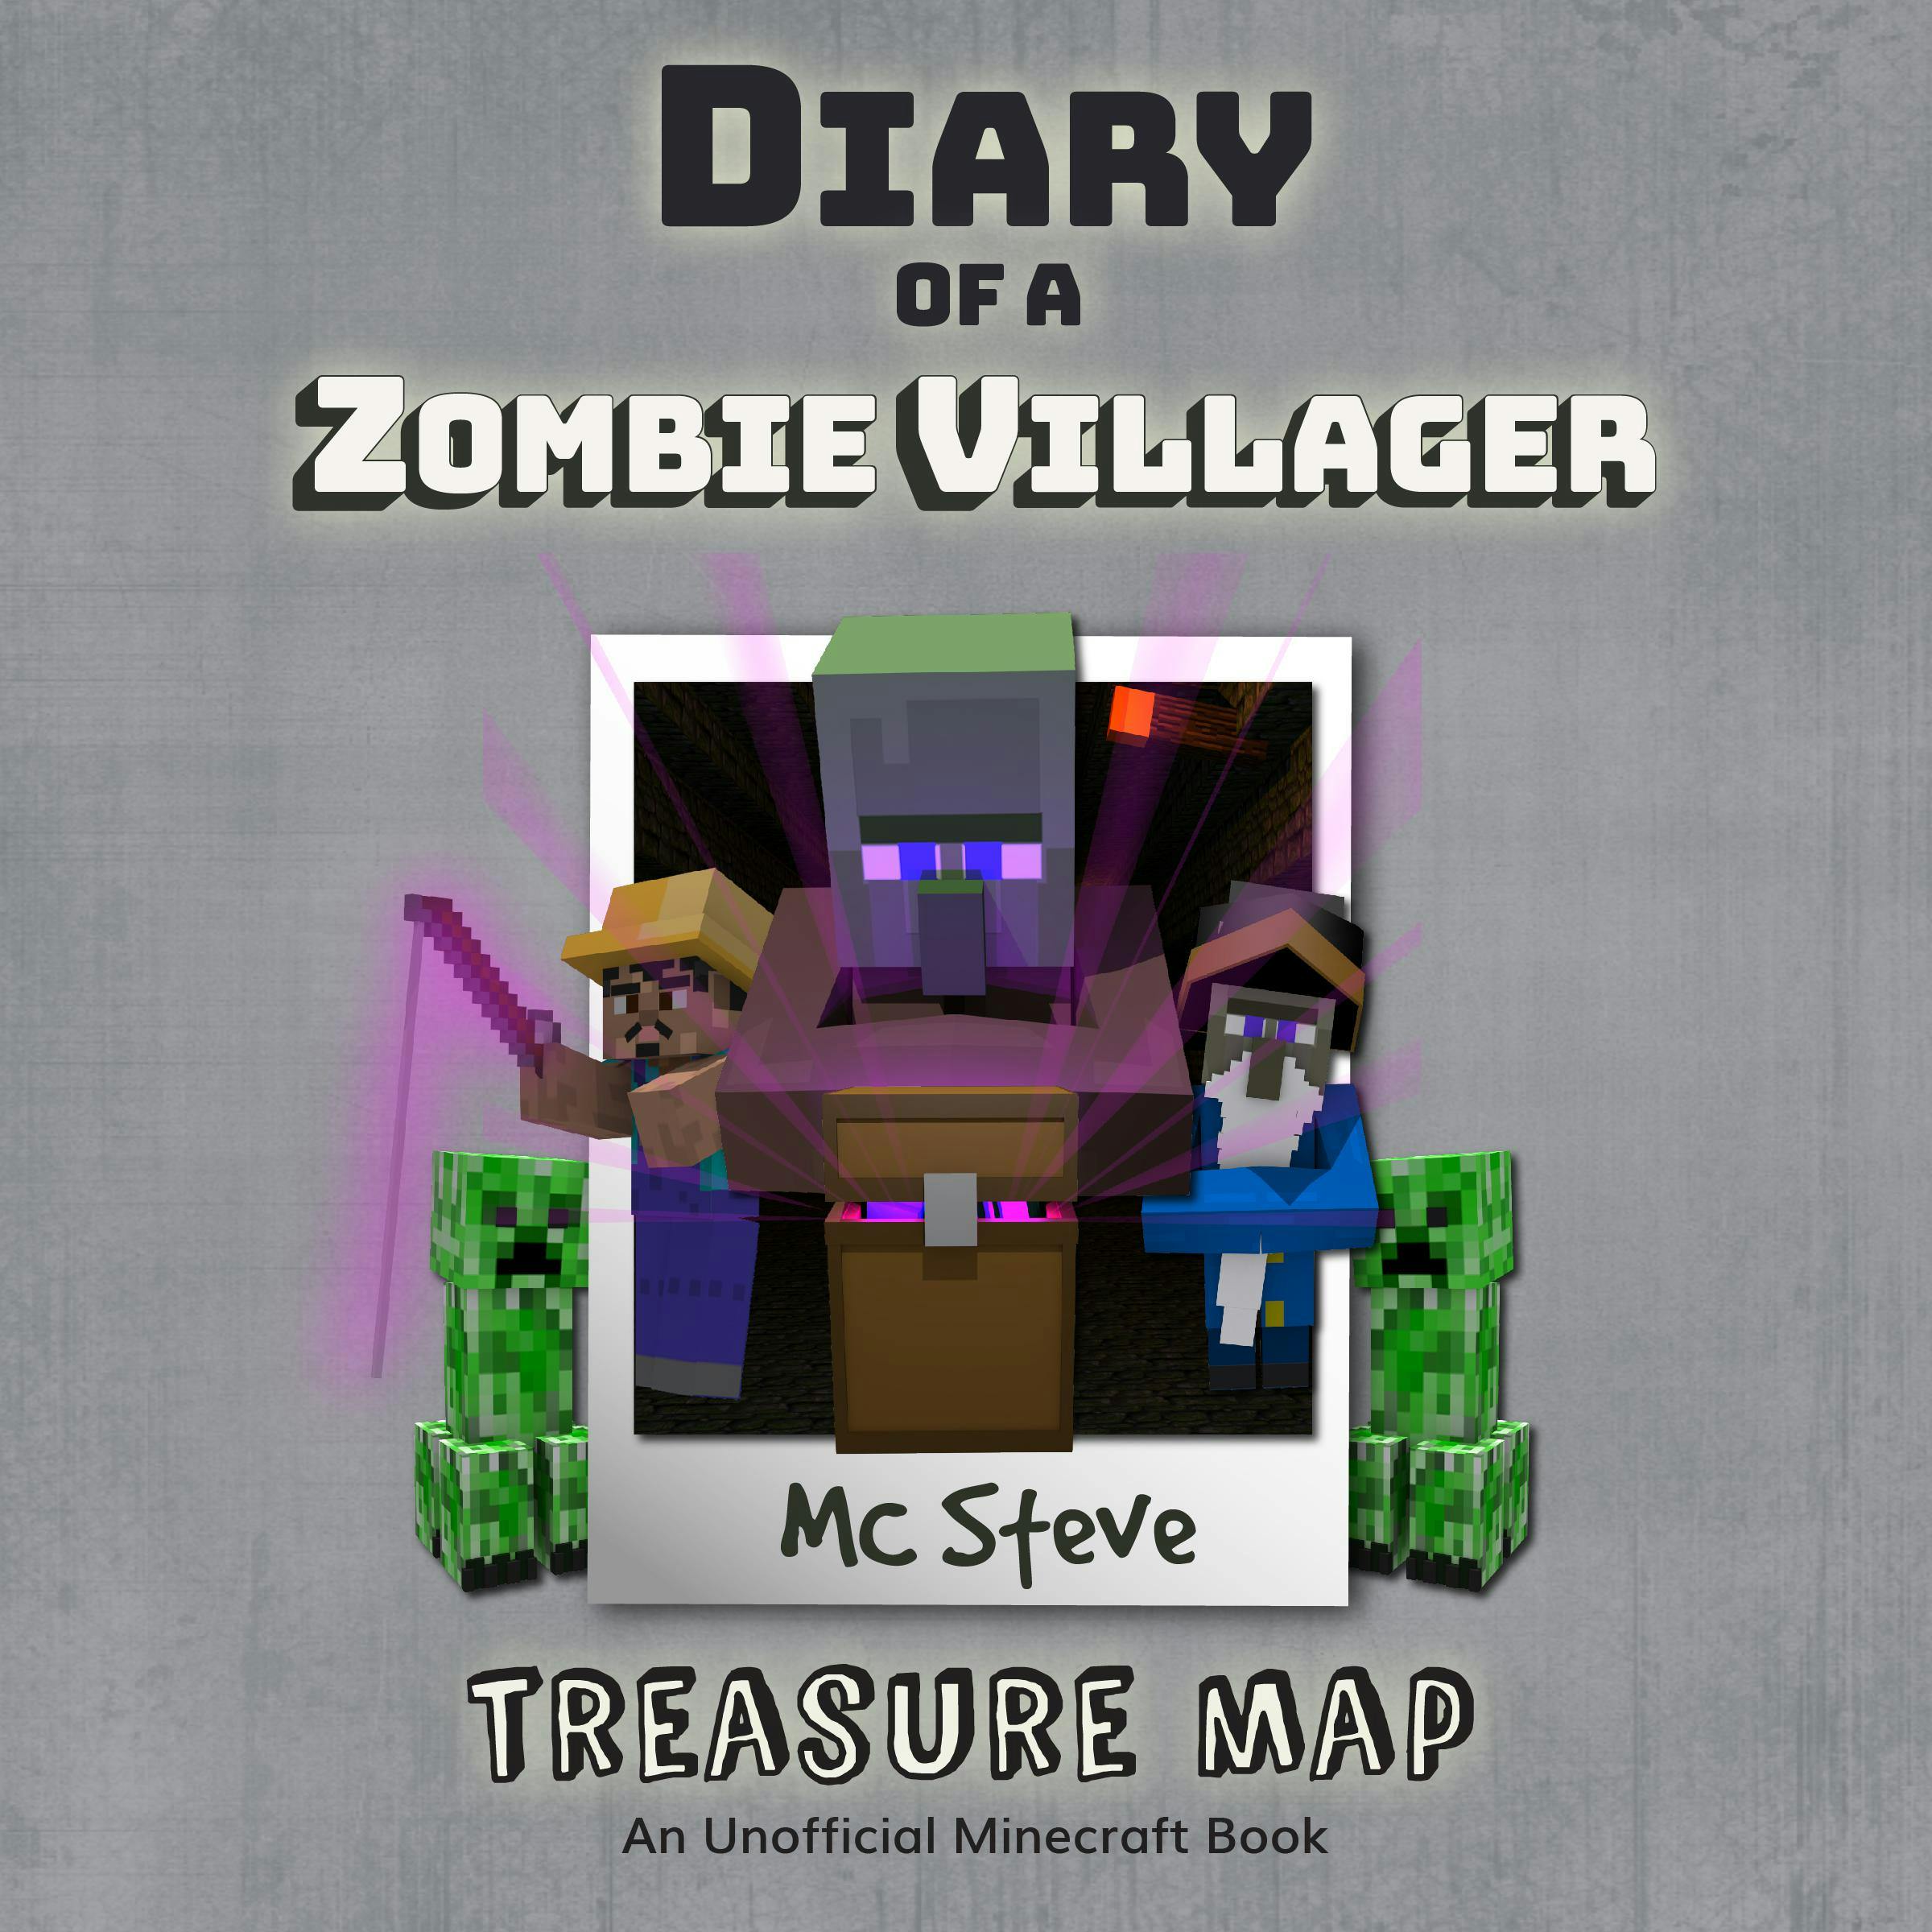 Diary Of A Zombie Villager Book 4 - Treasure Map: An Unofficial Minecraft Book - MC Steve